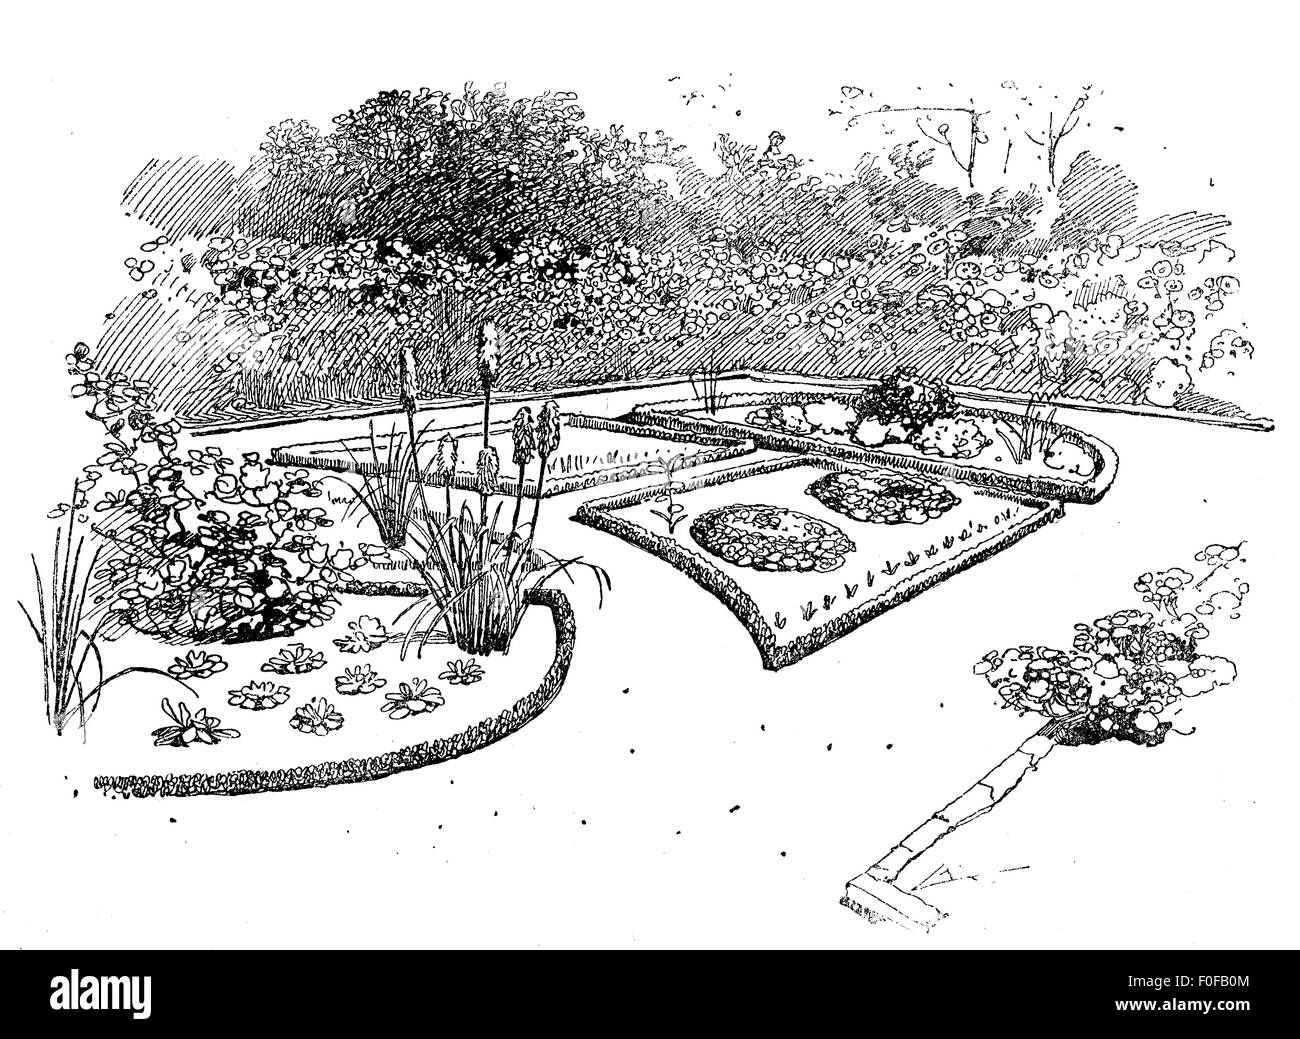 Ornamental garden engraving.Ornamental gardens use plants designed more for their aesthetic pleasure and appearance,flowering plants and bulbs in addition to foliage plants, ornamental grasses, shrubs and trees. Stock Photo